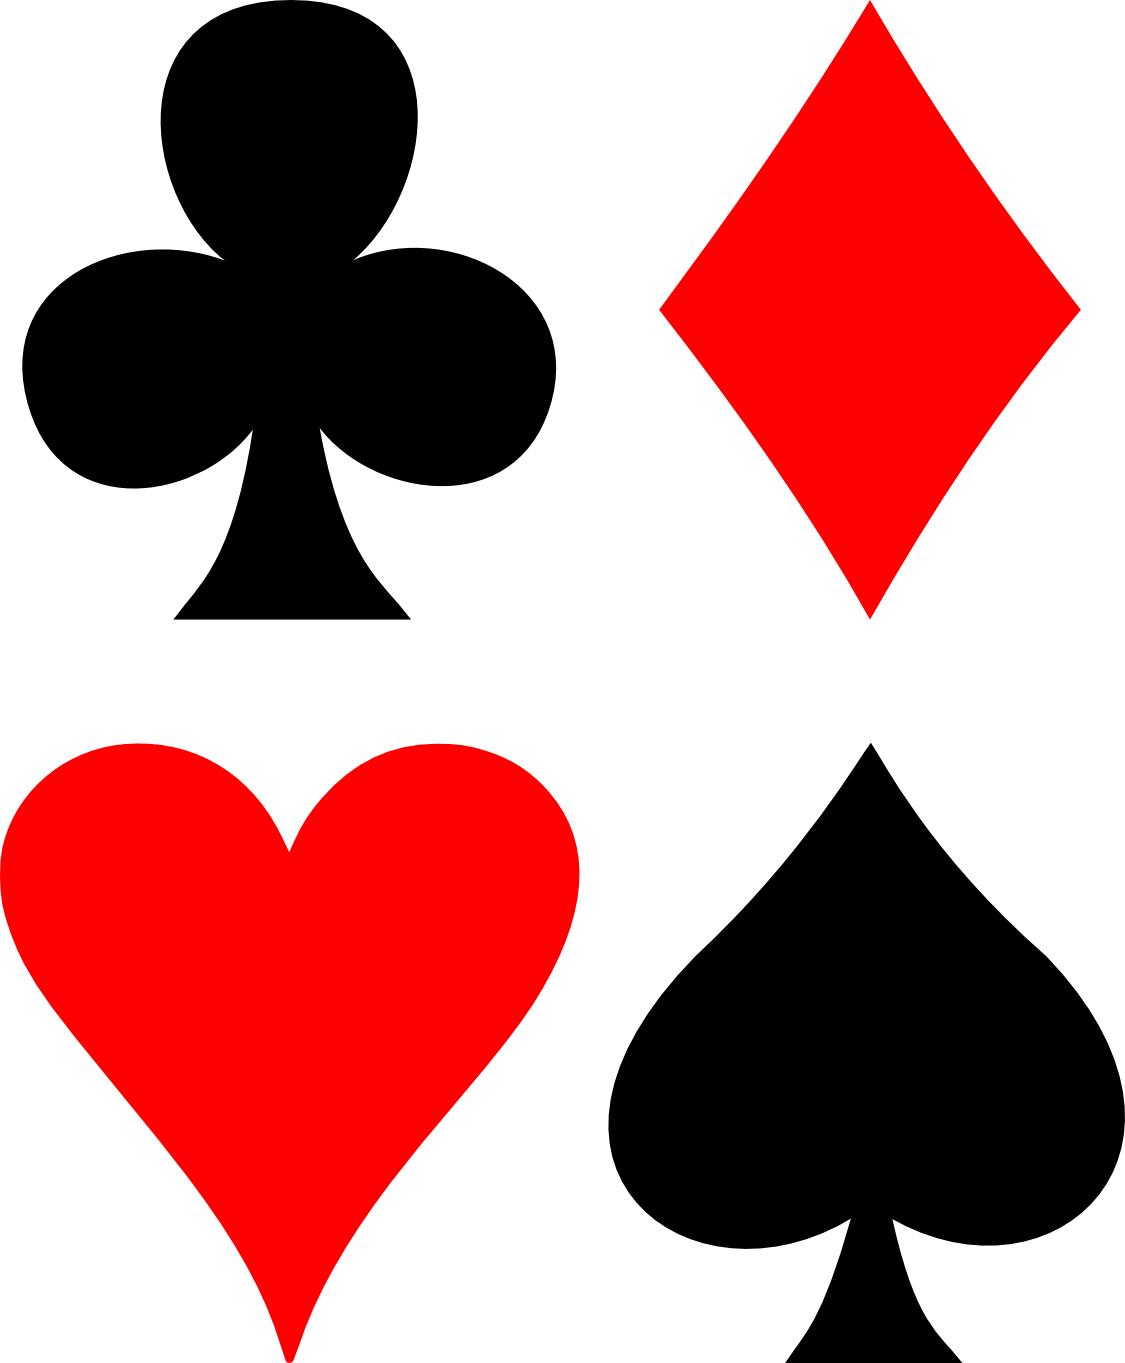 Playing Cards Symbols - Cliparts.co